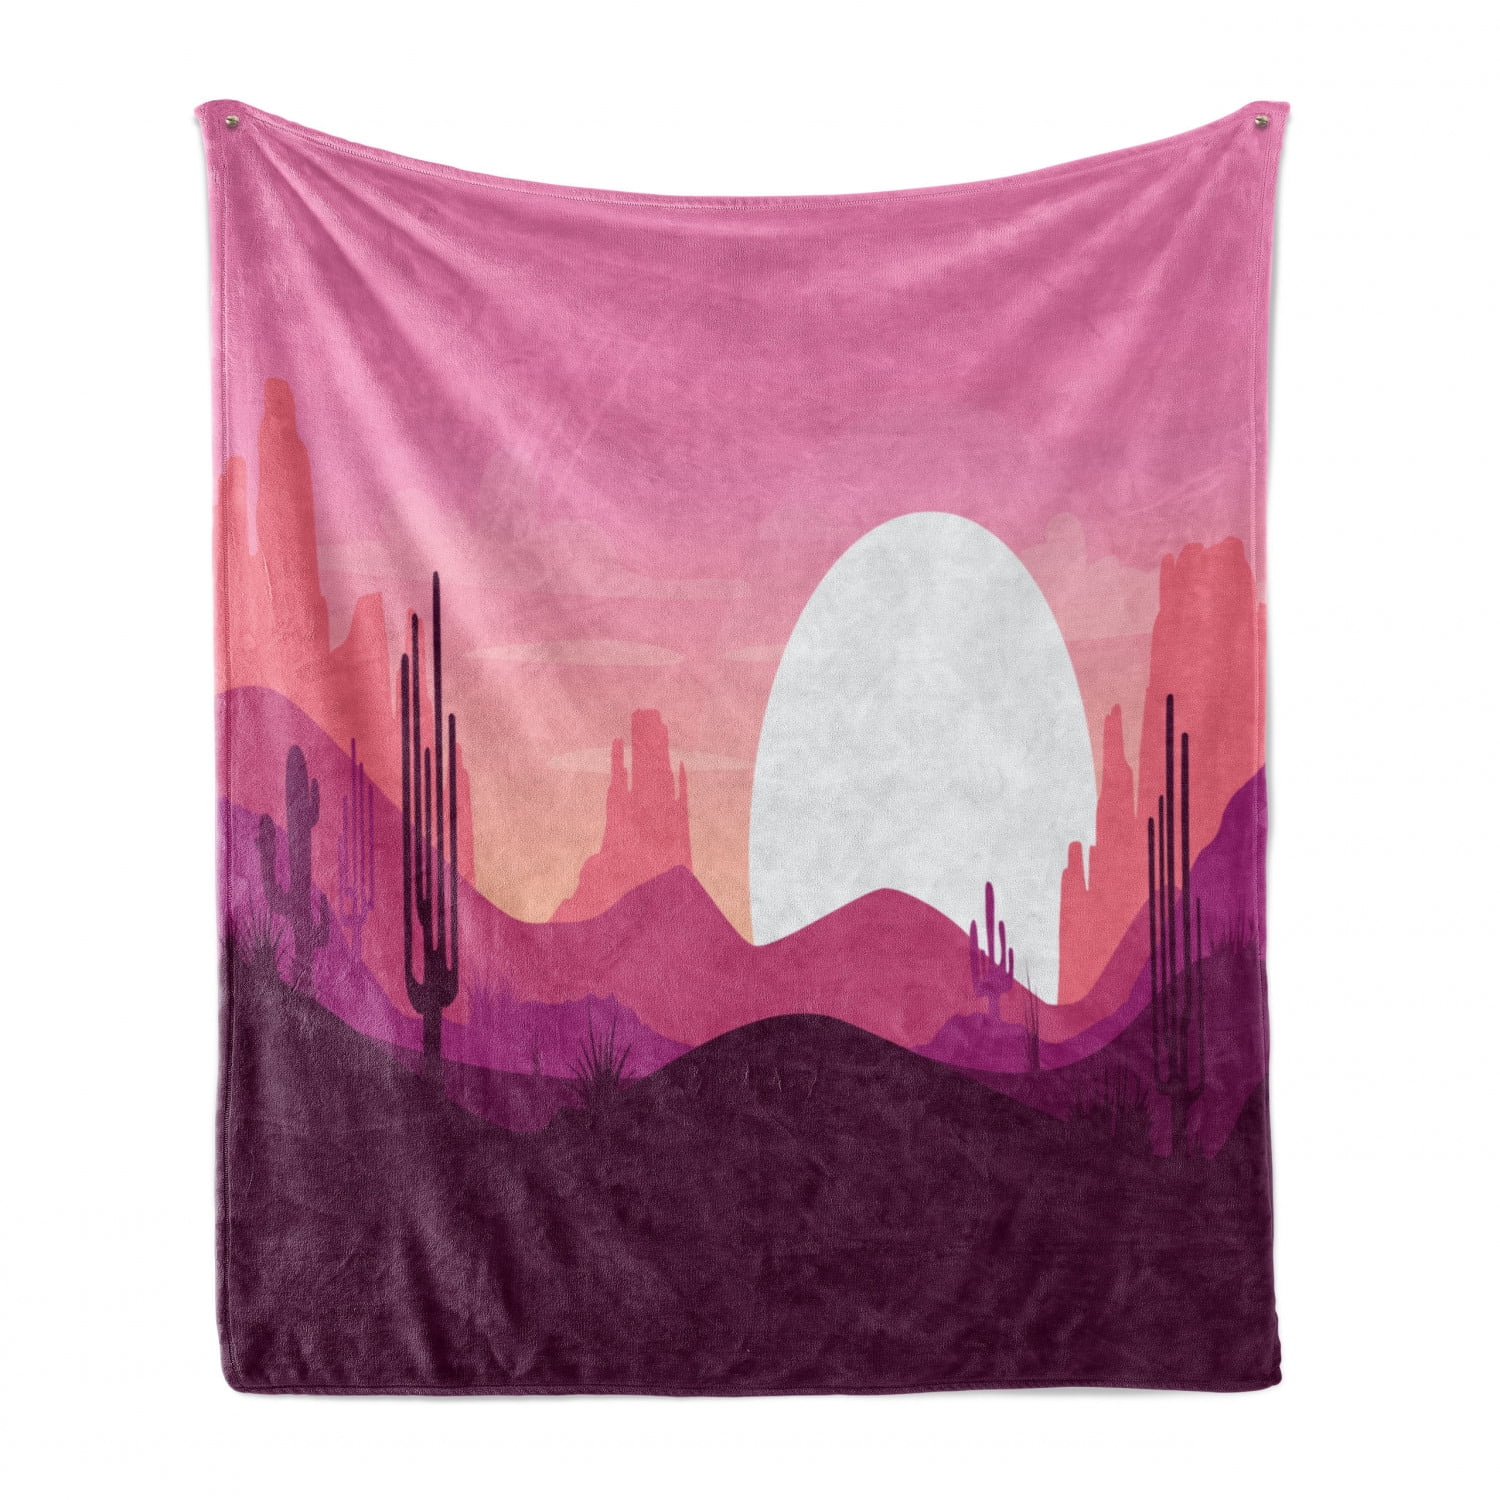 Cartoon Style Desert with Mountains Dunes and Cactus Silhouettes Arizona Sundown Multicolor 50 x 70 Cozy Plush for Indoor and Outdoor Use Ambesonne Landscape Soft Flannel Fleece Throw Blanket 